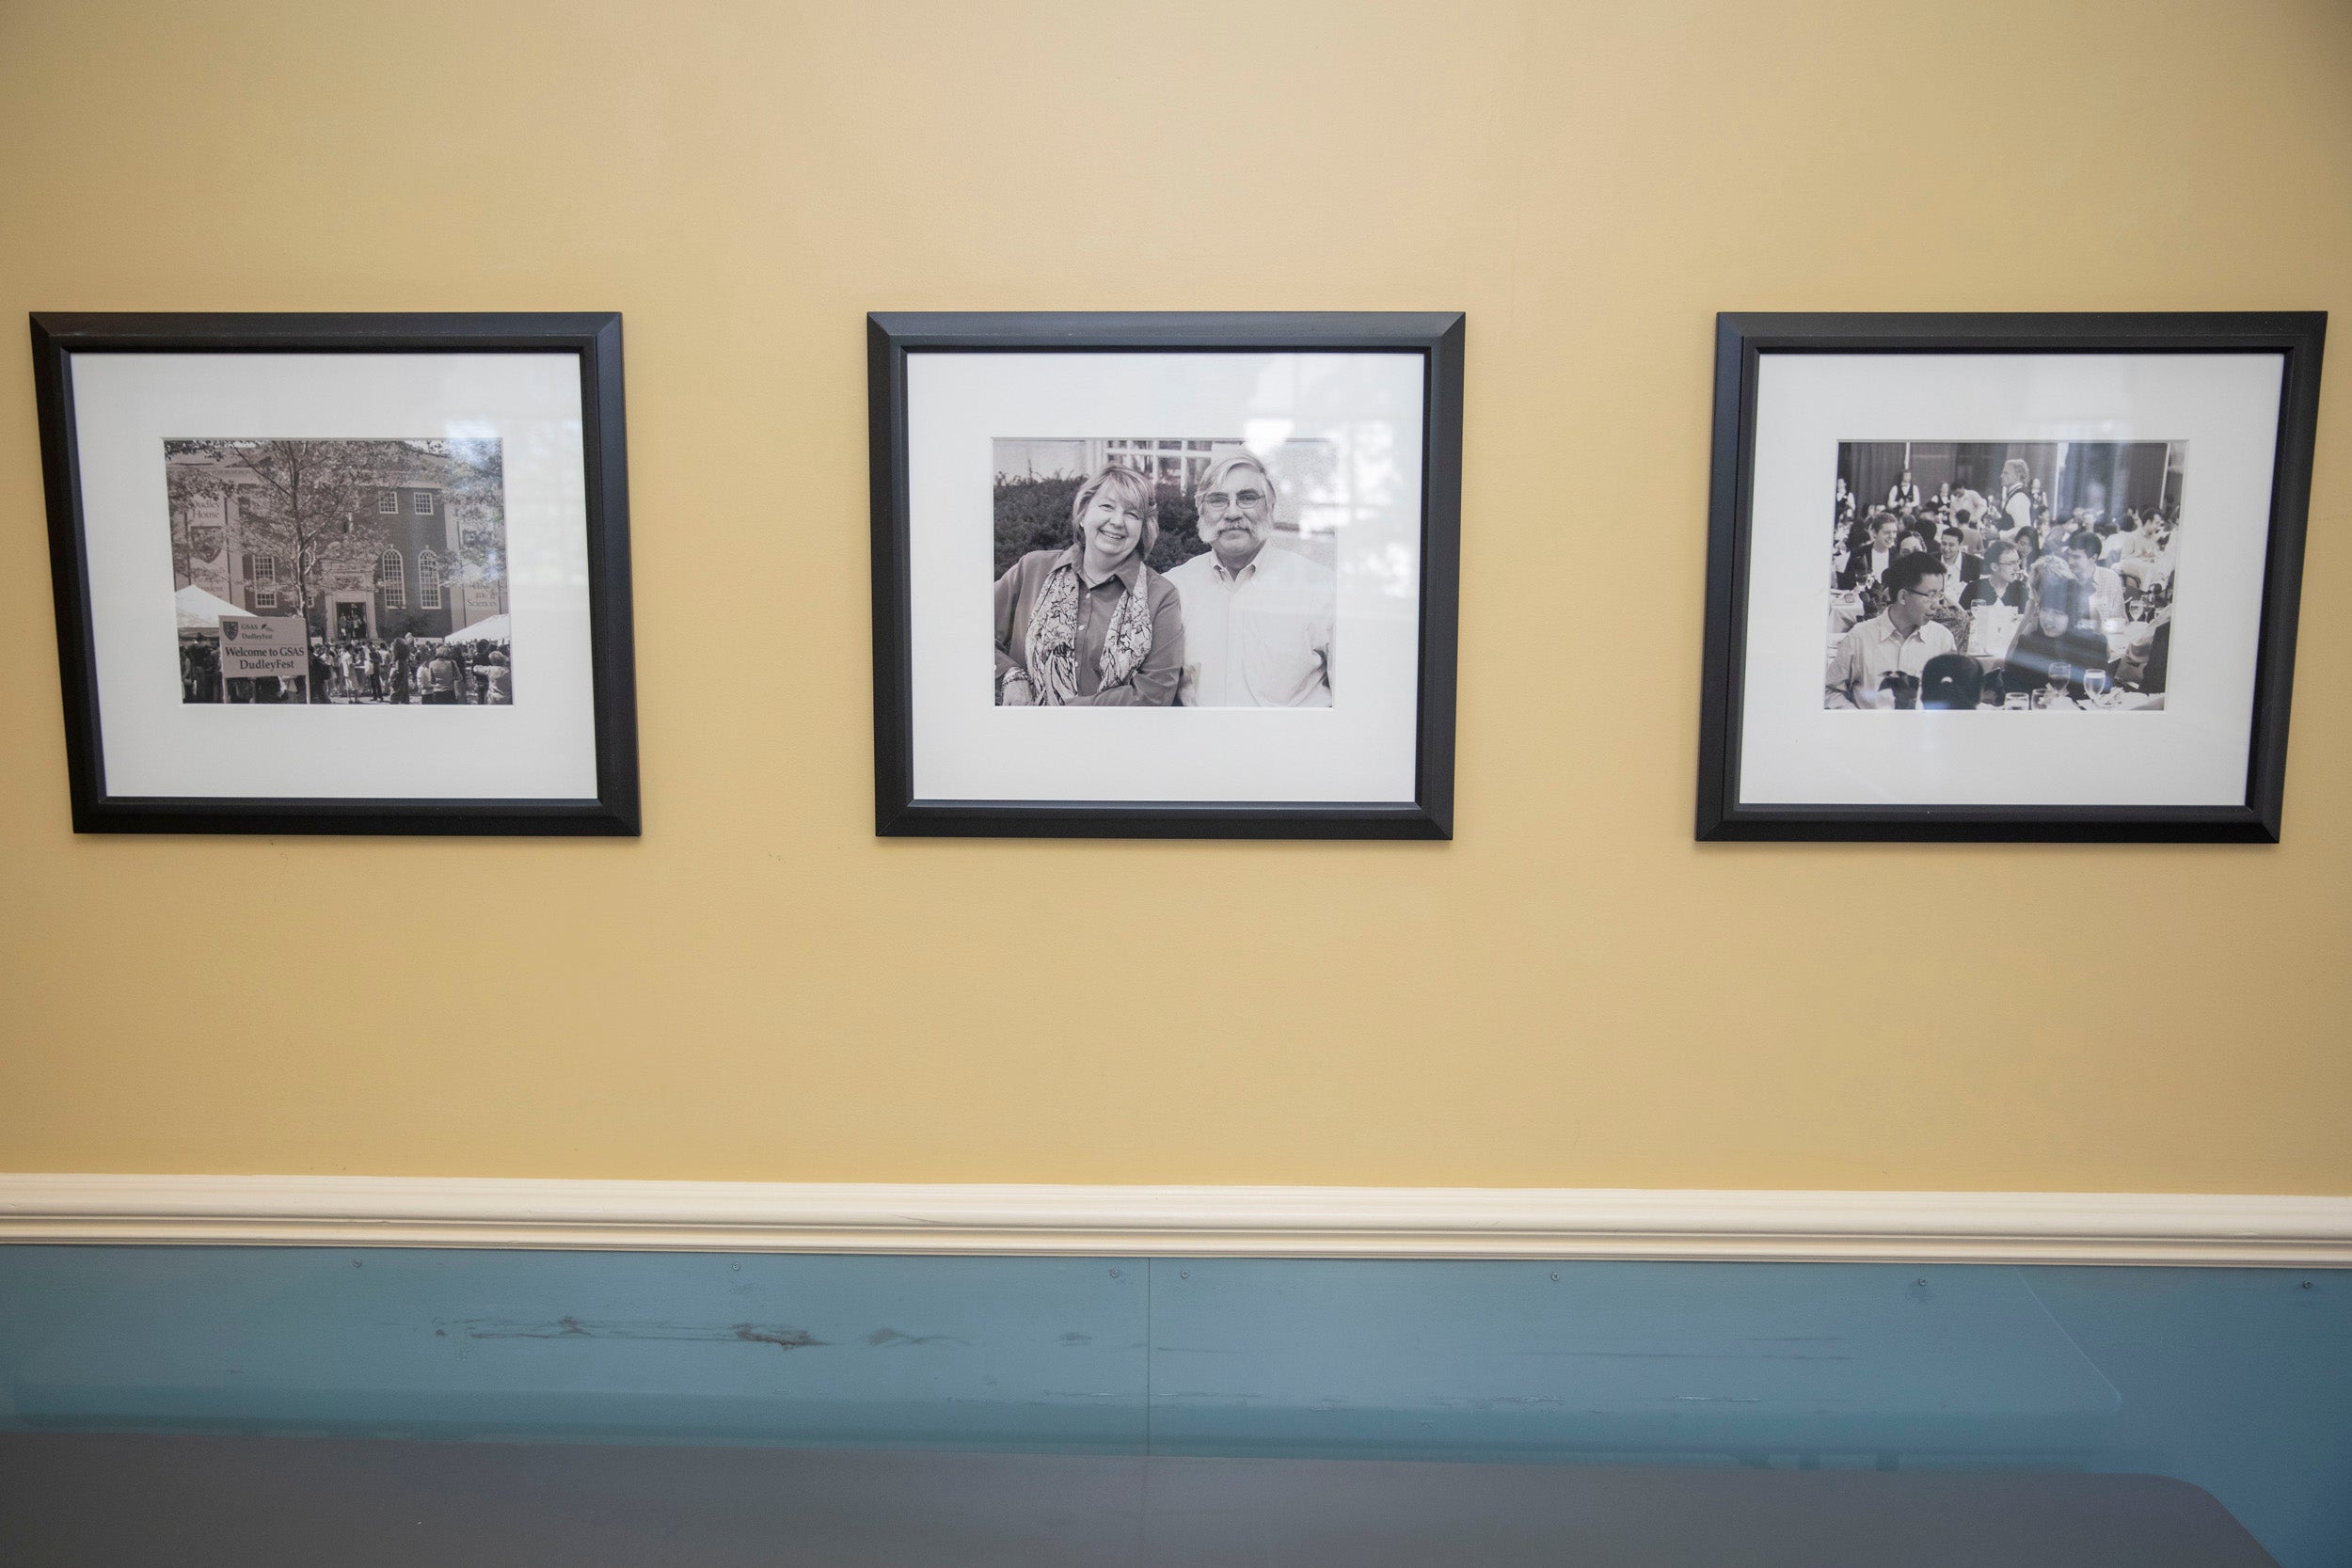 Photos from the era when the Dudley community resided in Lehman Hall line the hallways.